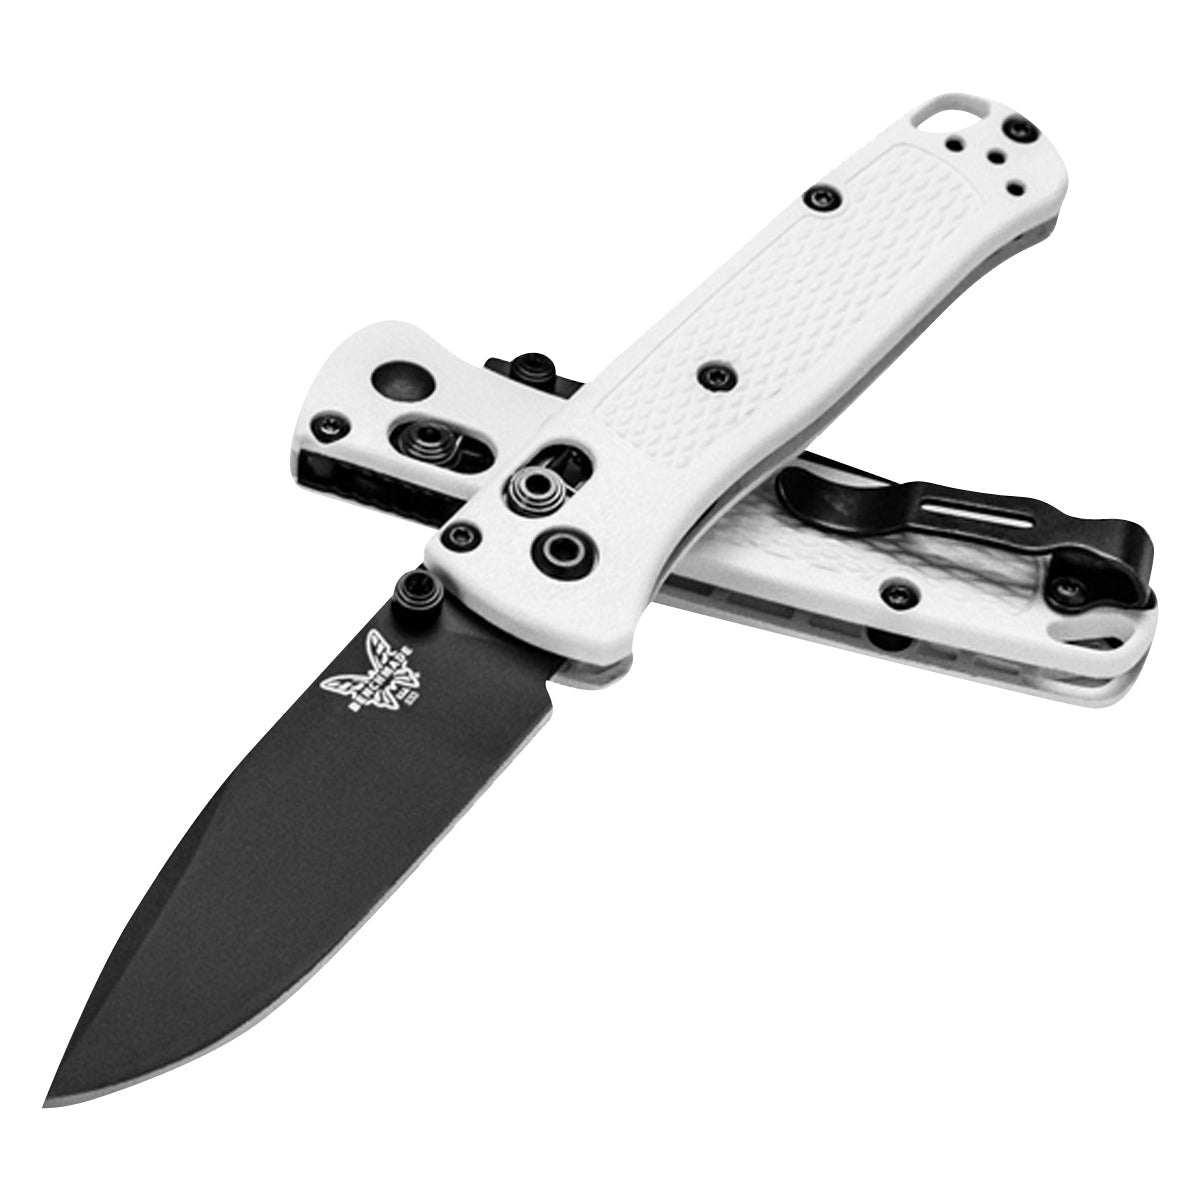 Benchmade 533 Mini Bugout in  by GOHUNT | Benchmade - GOHUNT Shop